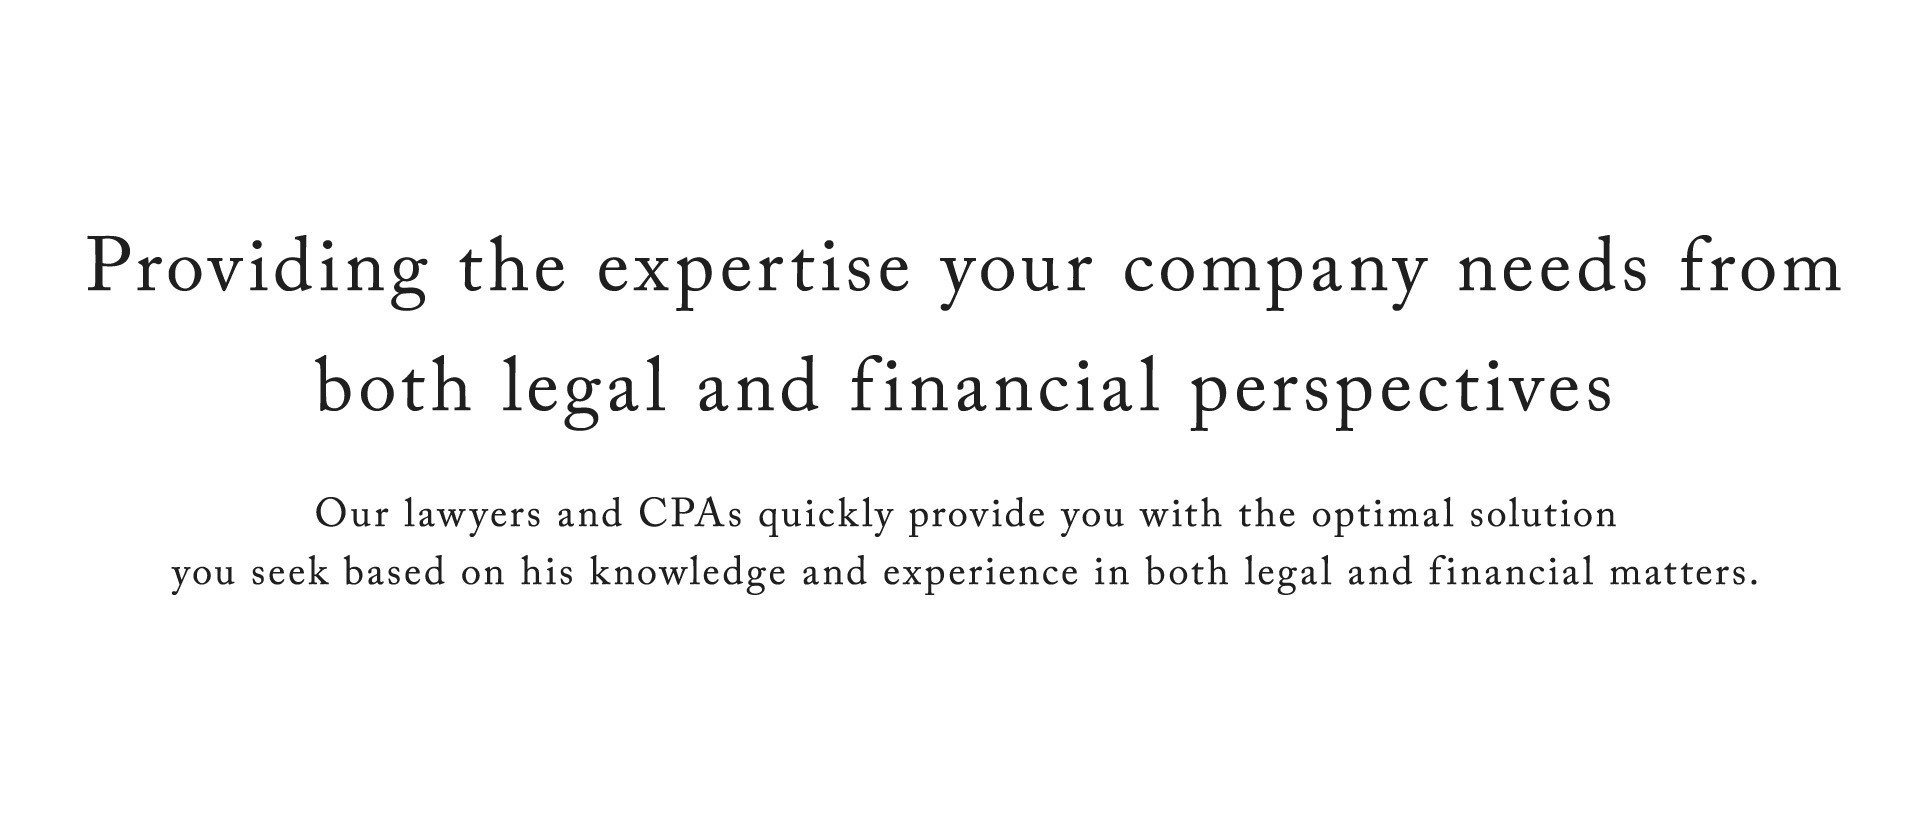 Providing the expertise your company needs from both legal and financial perspectives